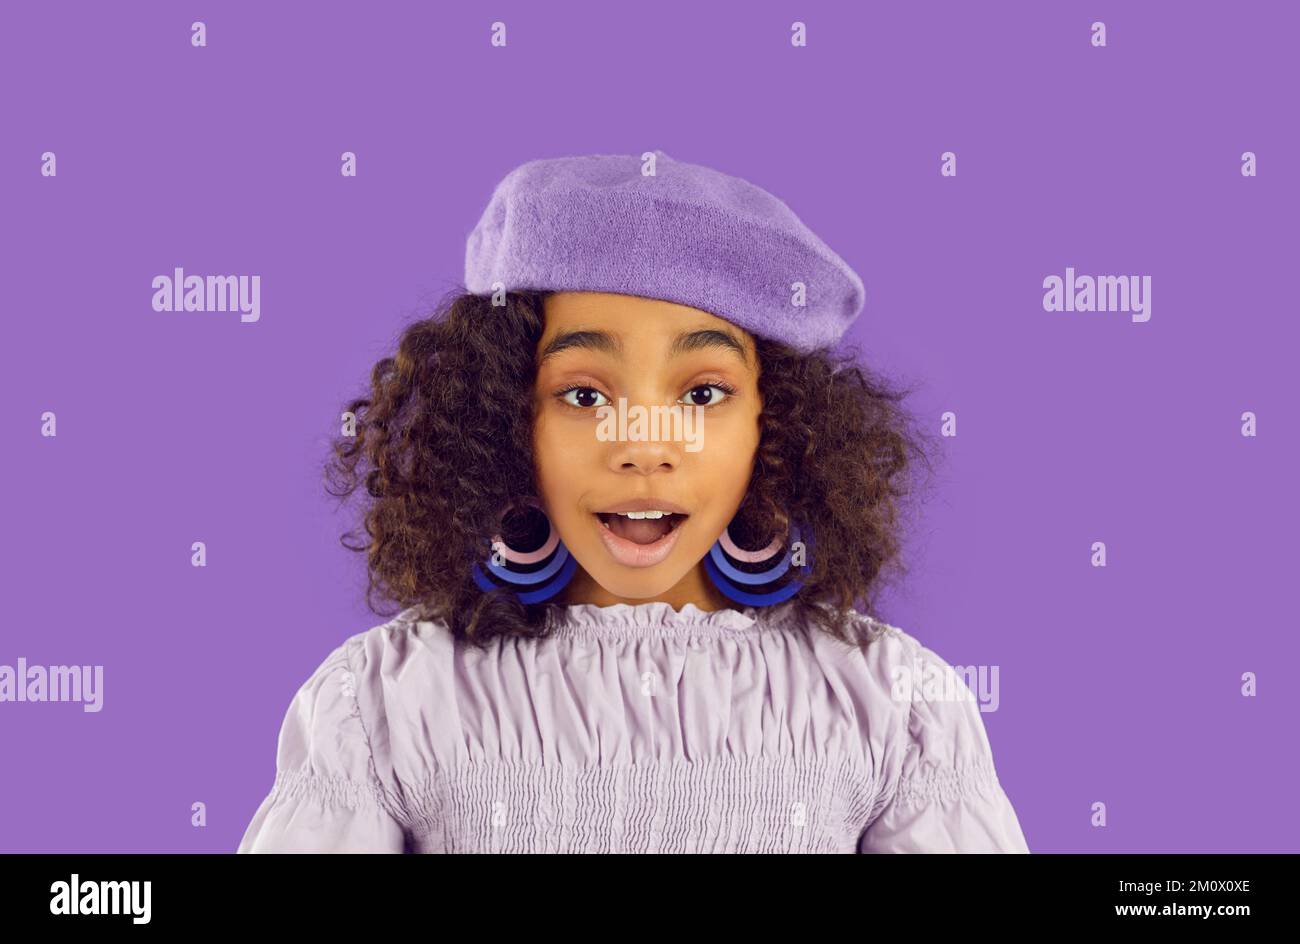 Black girl in purple beret and hoop earrings looking at camera with surprised face expression Stock Photo